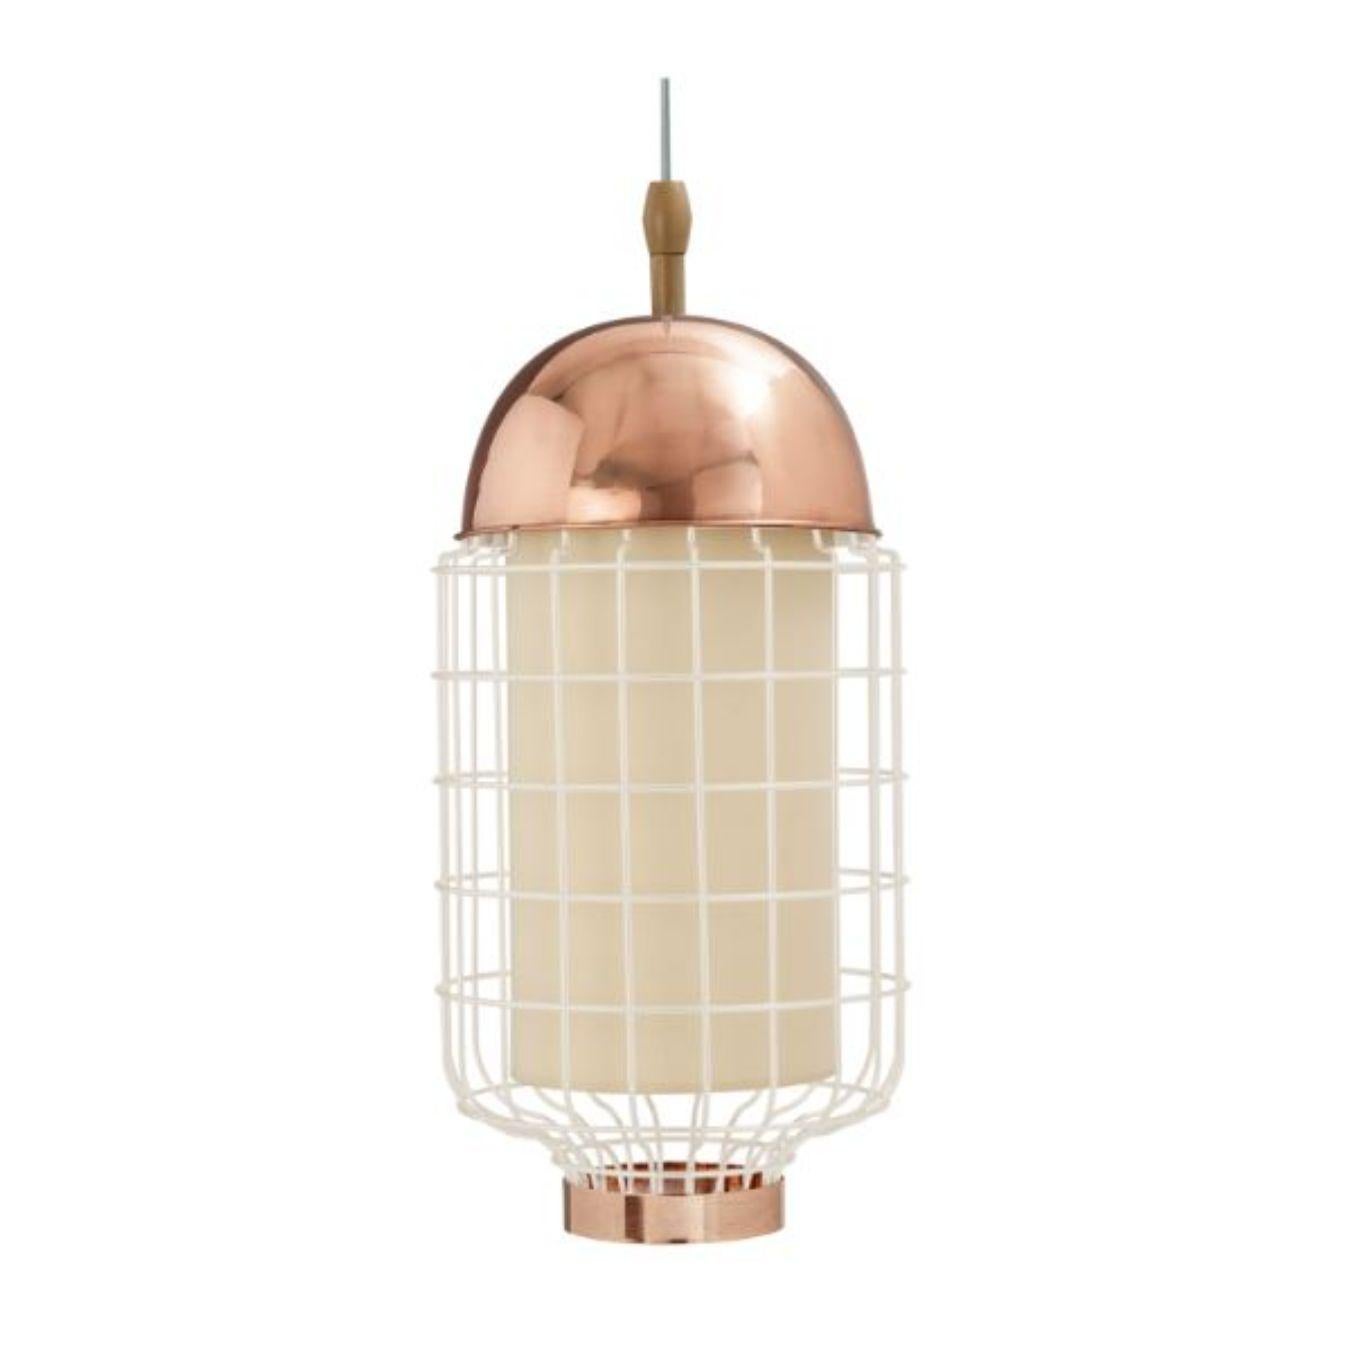 Copper ivory magnolia II suspension lamp with copper ring by Dooq.
Dimensions: W 27 x D 27 x H 59 cm.
Materials: lacquered metal, polished or brushed metal, copper.
Abat-jour: cotton
Also available in different colours and materials.